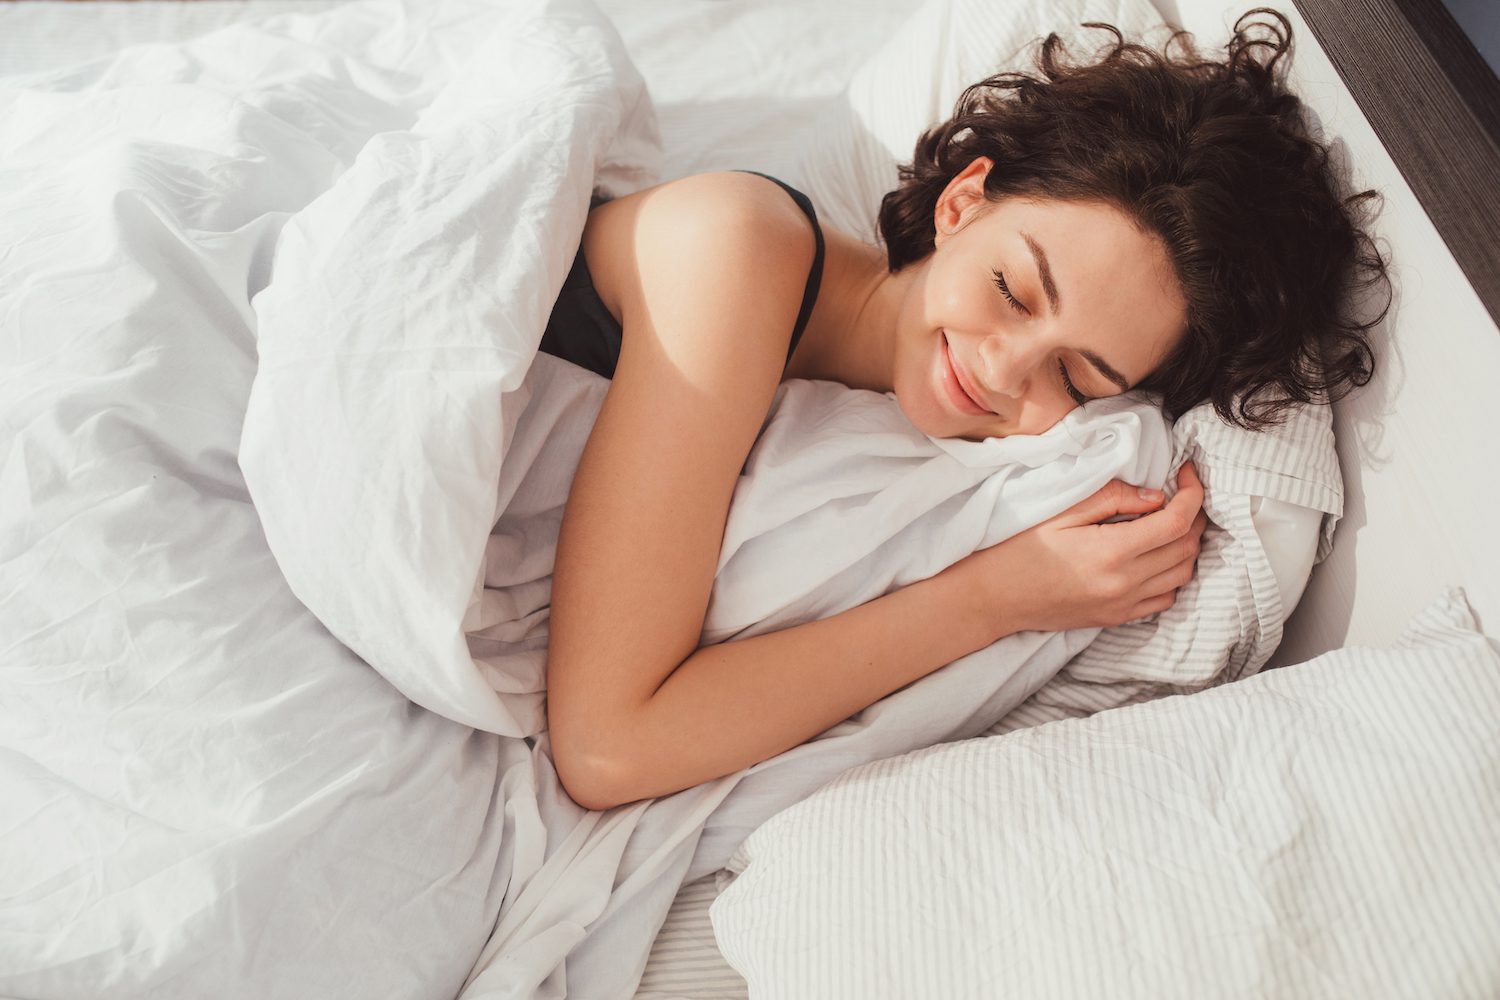 8 Reasons Sleeping on Your Back May Help You Get the Rest You Need